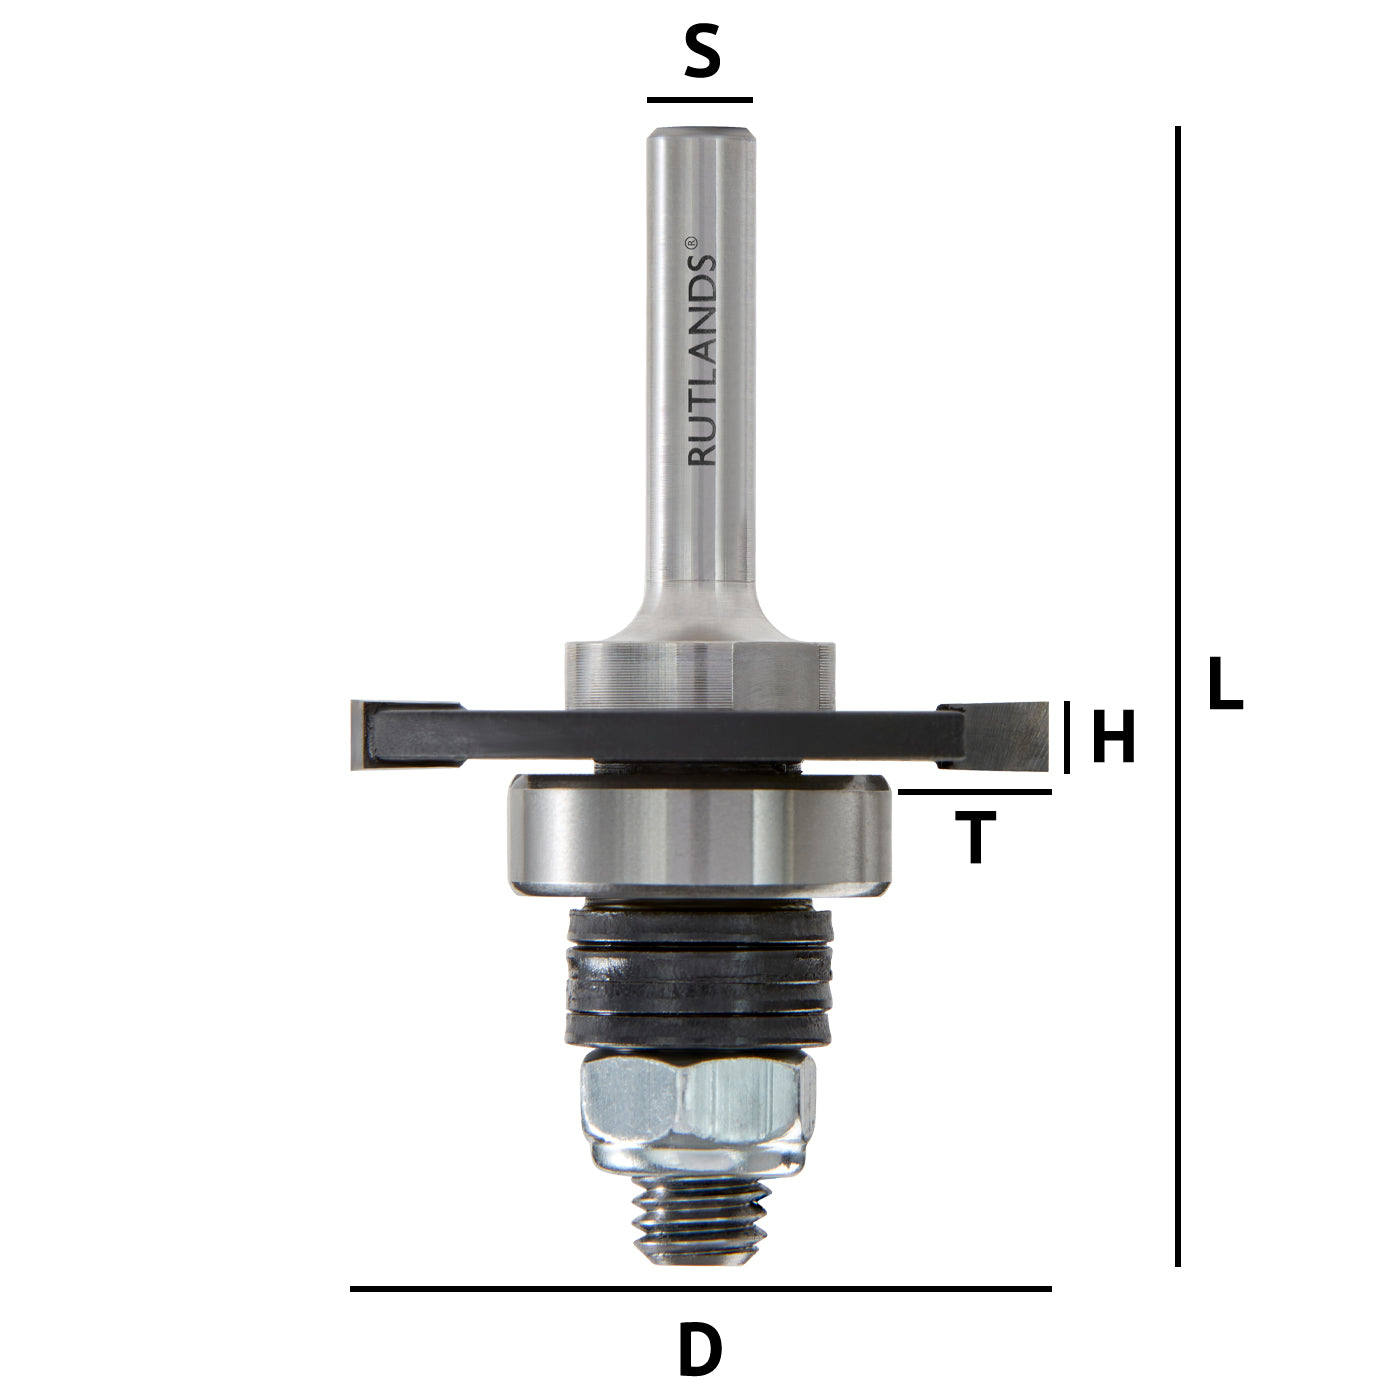 Router Bit - Slot for Biscuits No 0, 10 & 20 - D=40mm H=4mm L=65mm S=1/4"